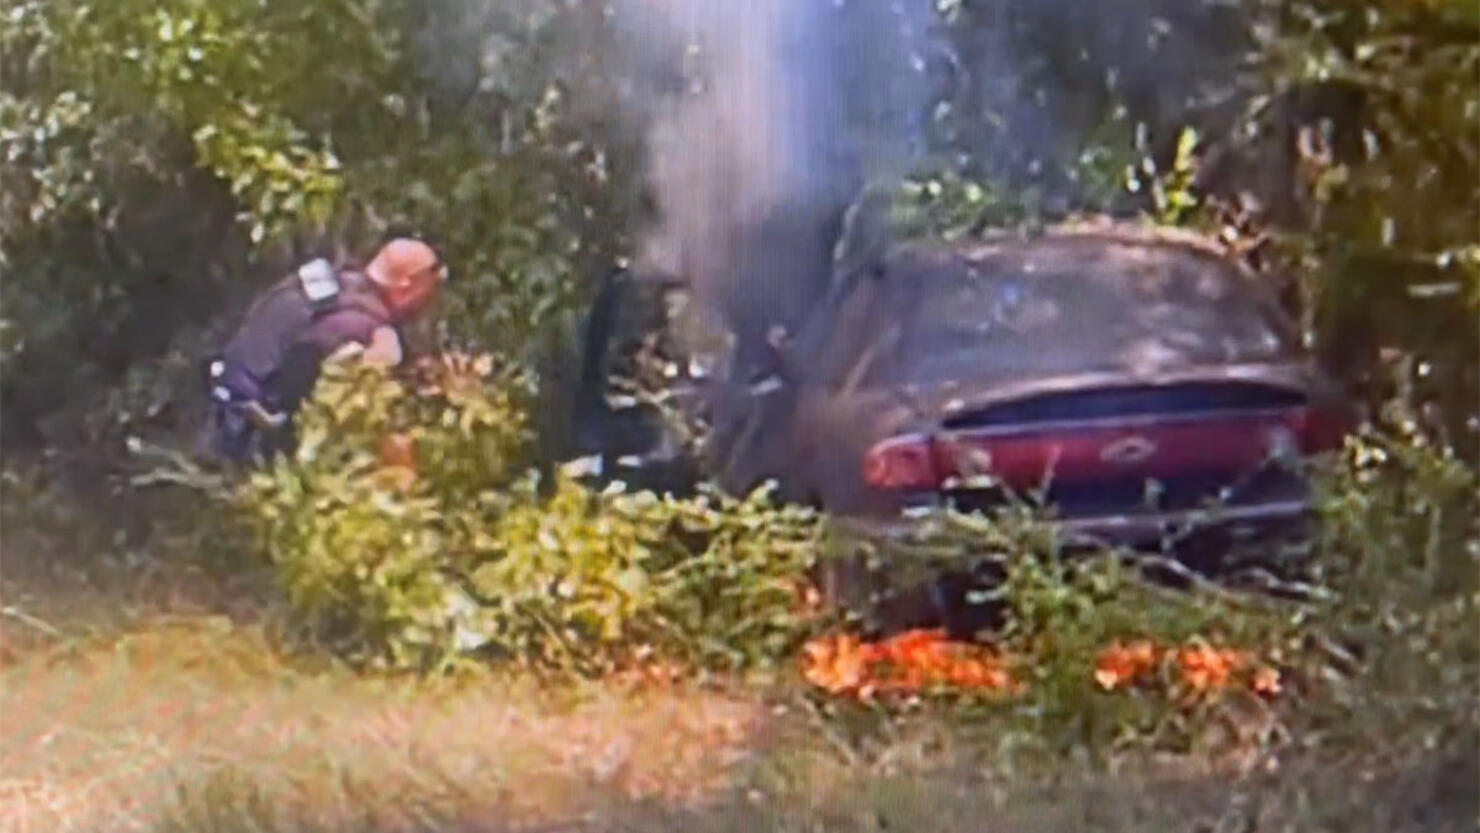 Police Officer Rescues dog from burning car